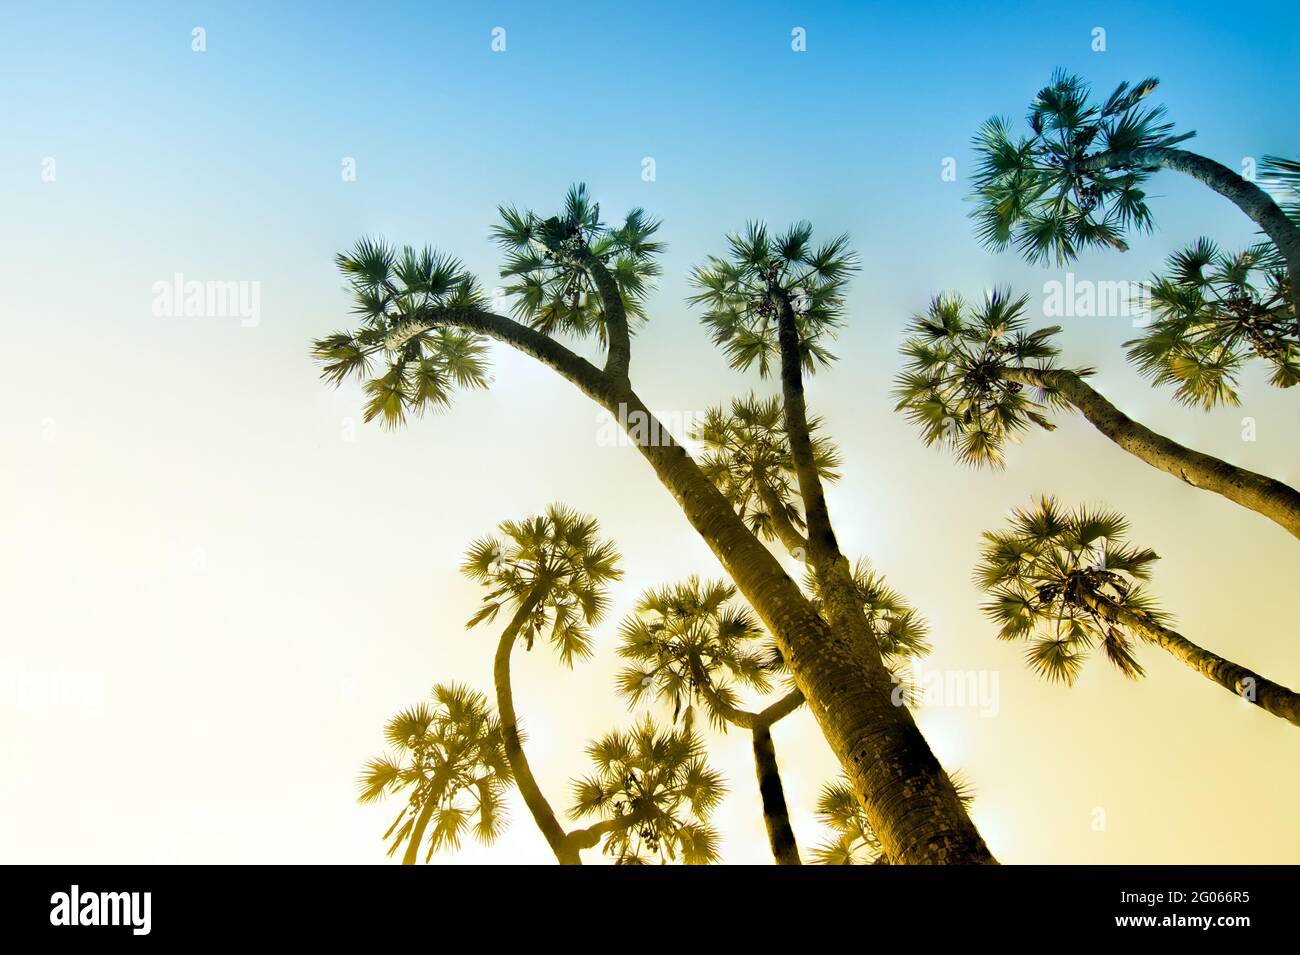 Focus stacked image of palm trees , high up to blue sky in background. Beautiful nature stock image, Indian natural scenic view. Stock Photo